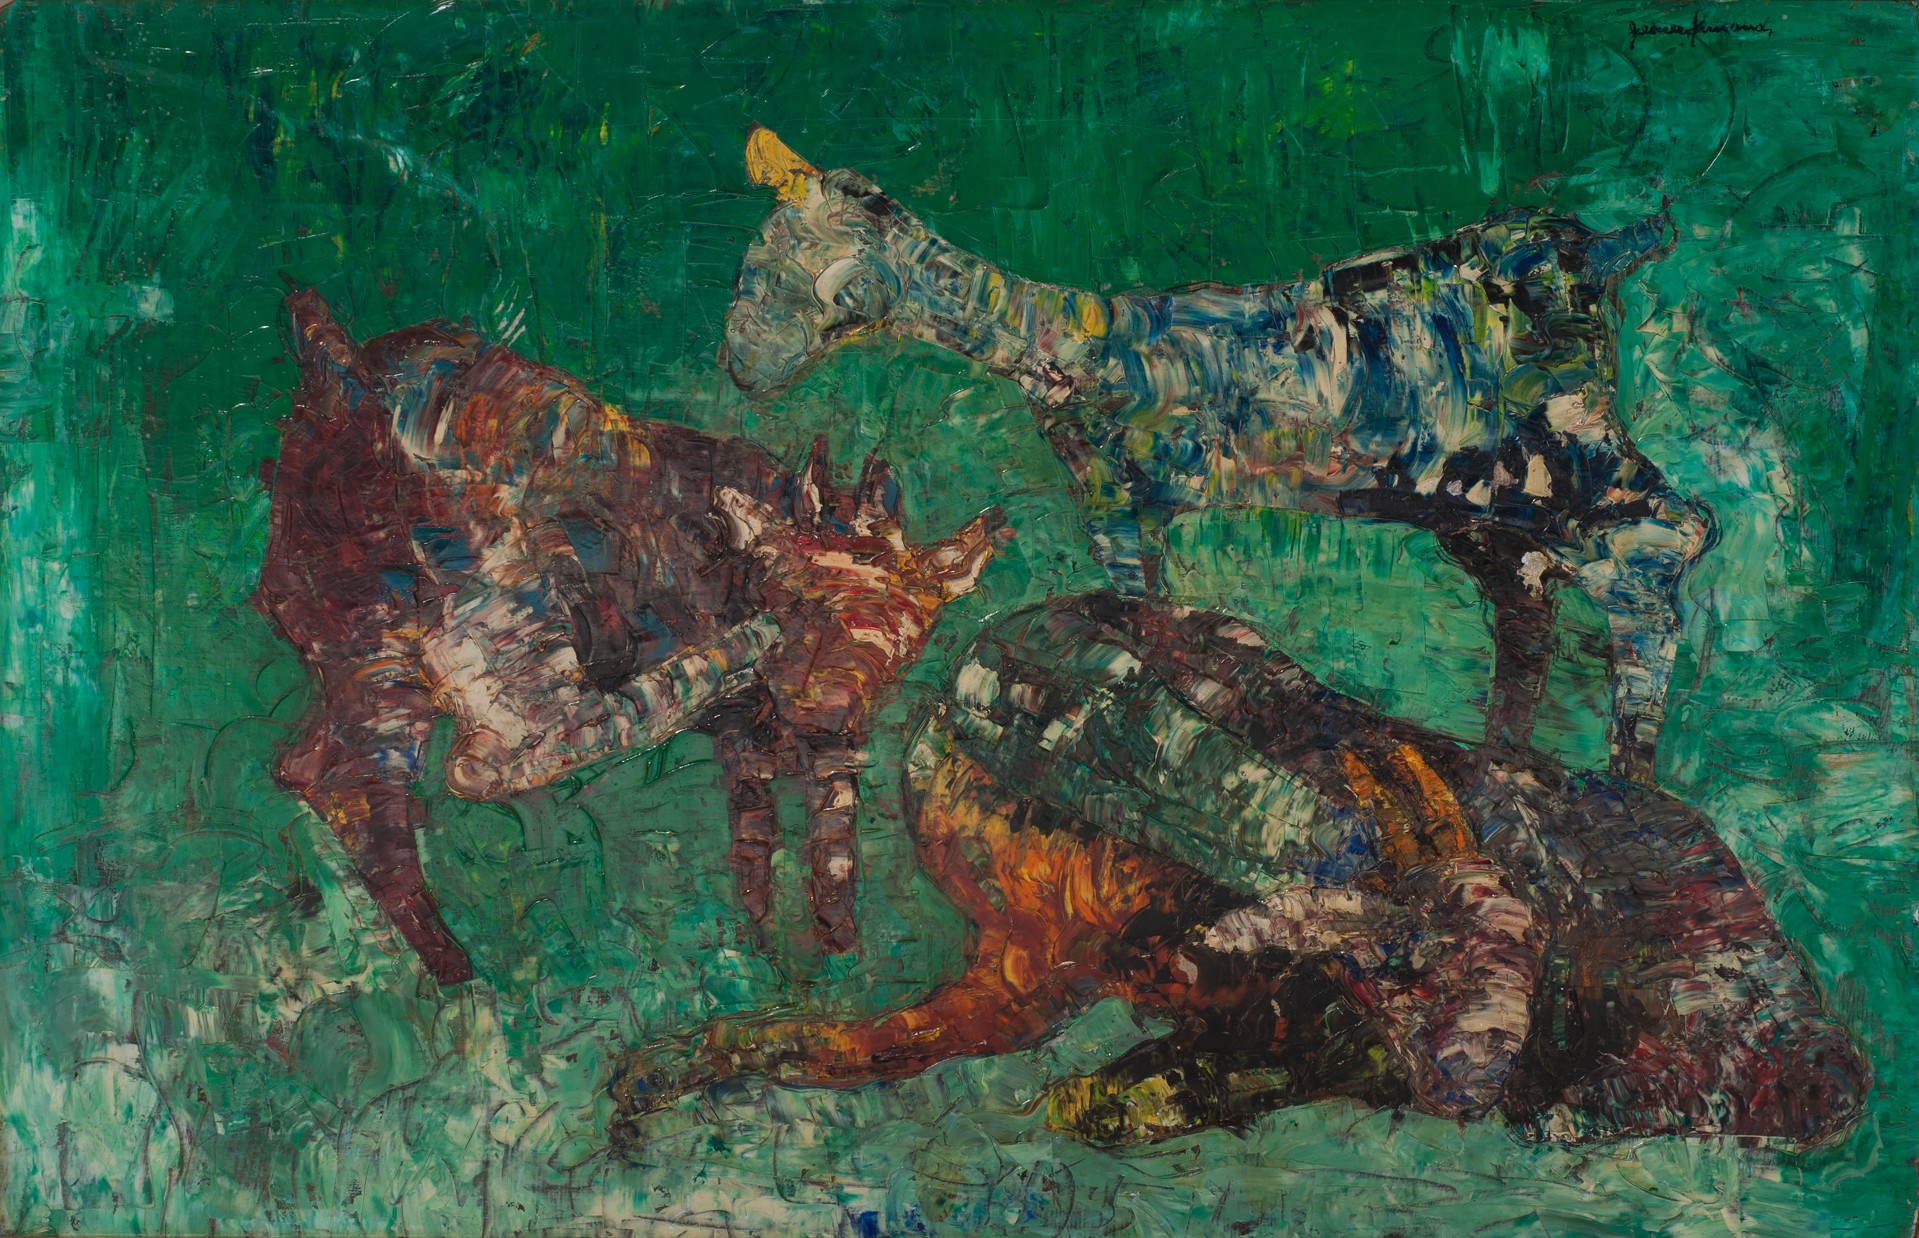 Goat Fight #24-3-96GSN by Gesner Armand (Haitian, 1936-2008)